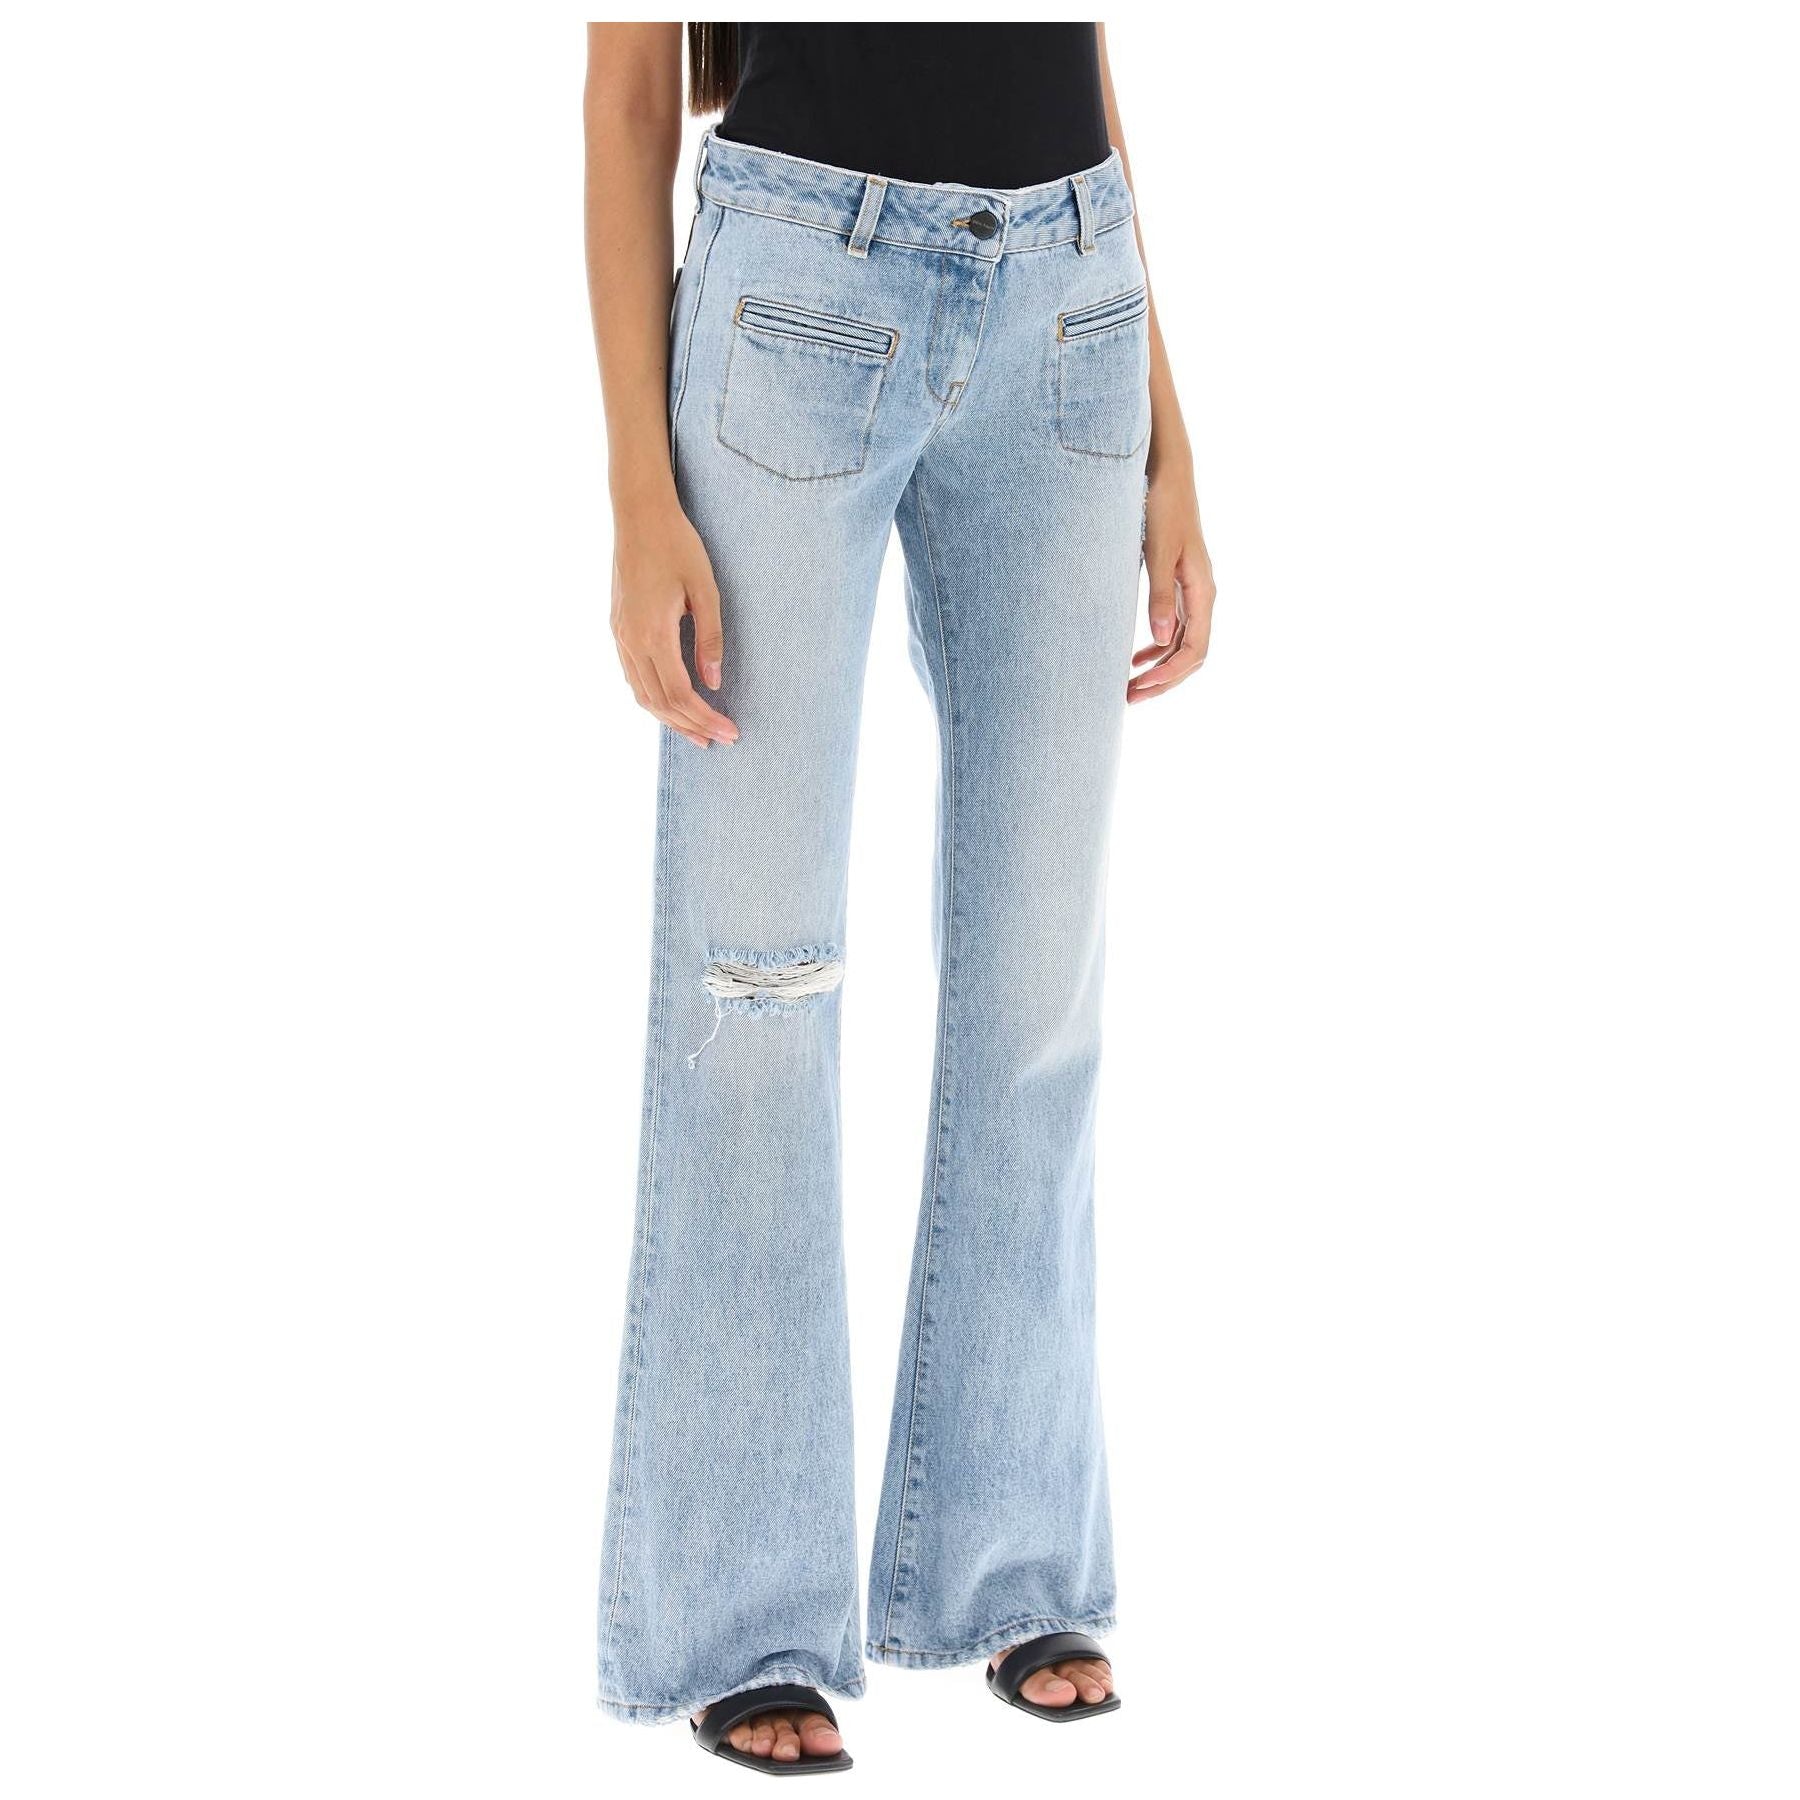 Low Rise Waist Bootcut Jeans